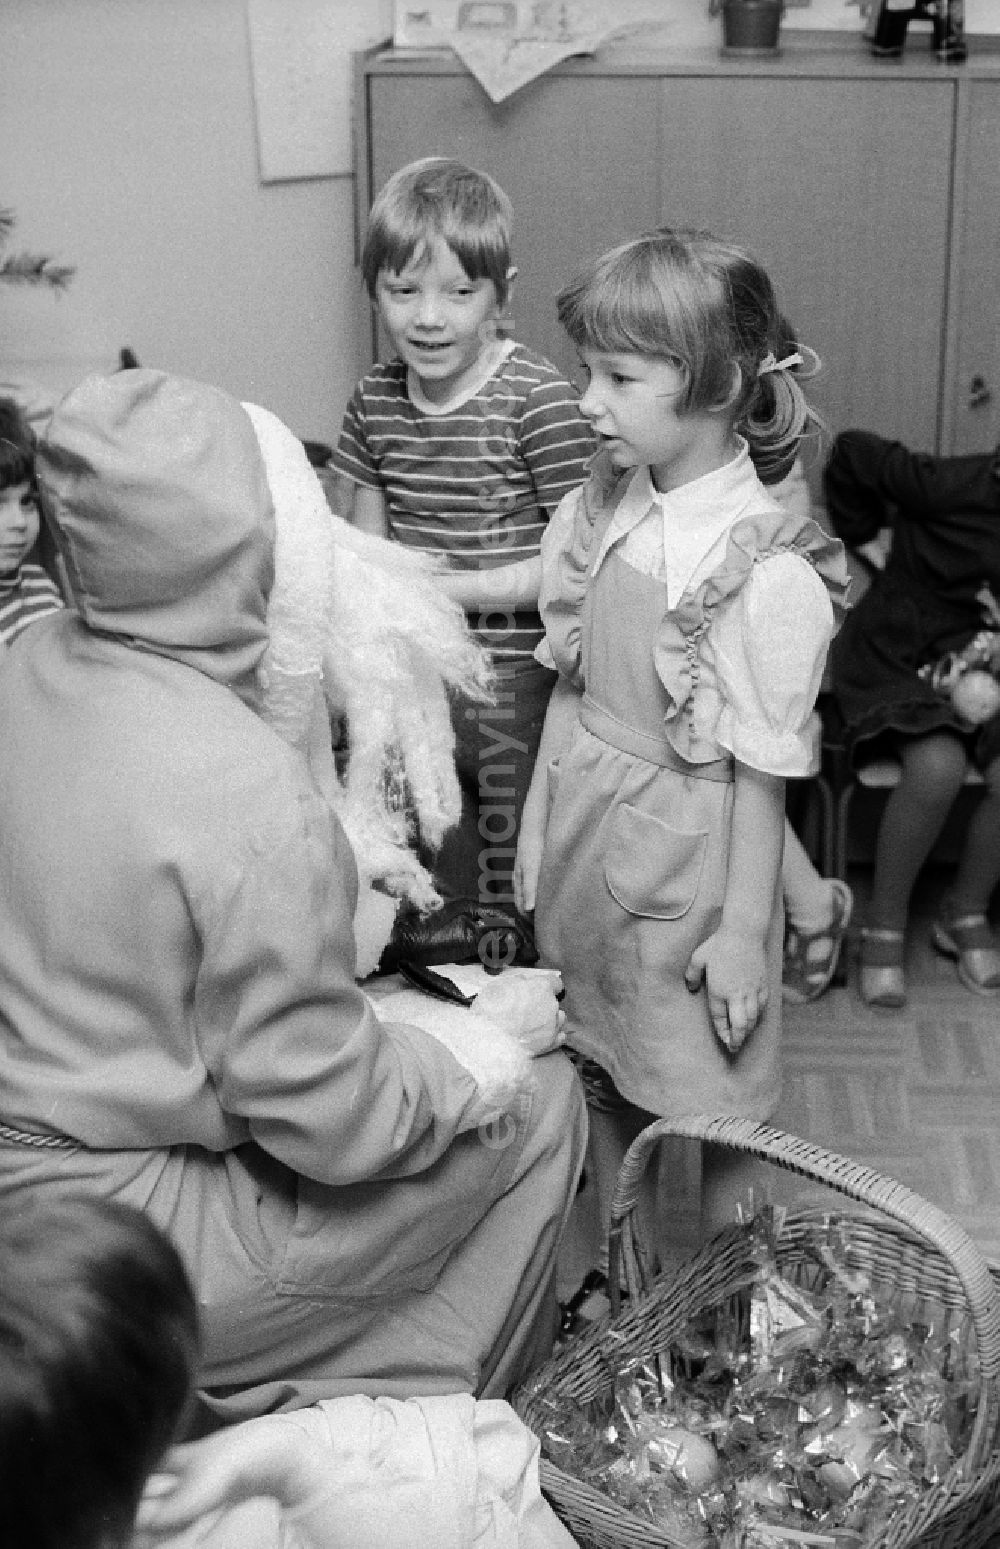 GDR image archive: Berlin - The Santa Claus gives children with presents in a kindergarten in Berlin, the former capital of the GDR, German democratic republic